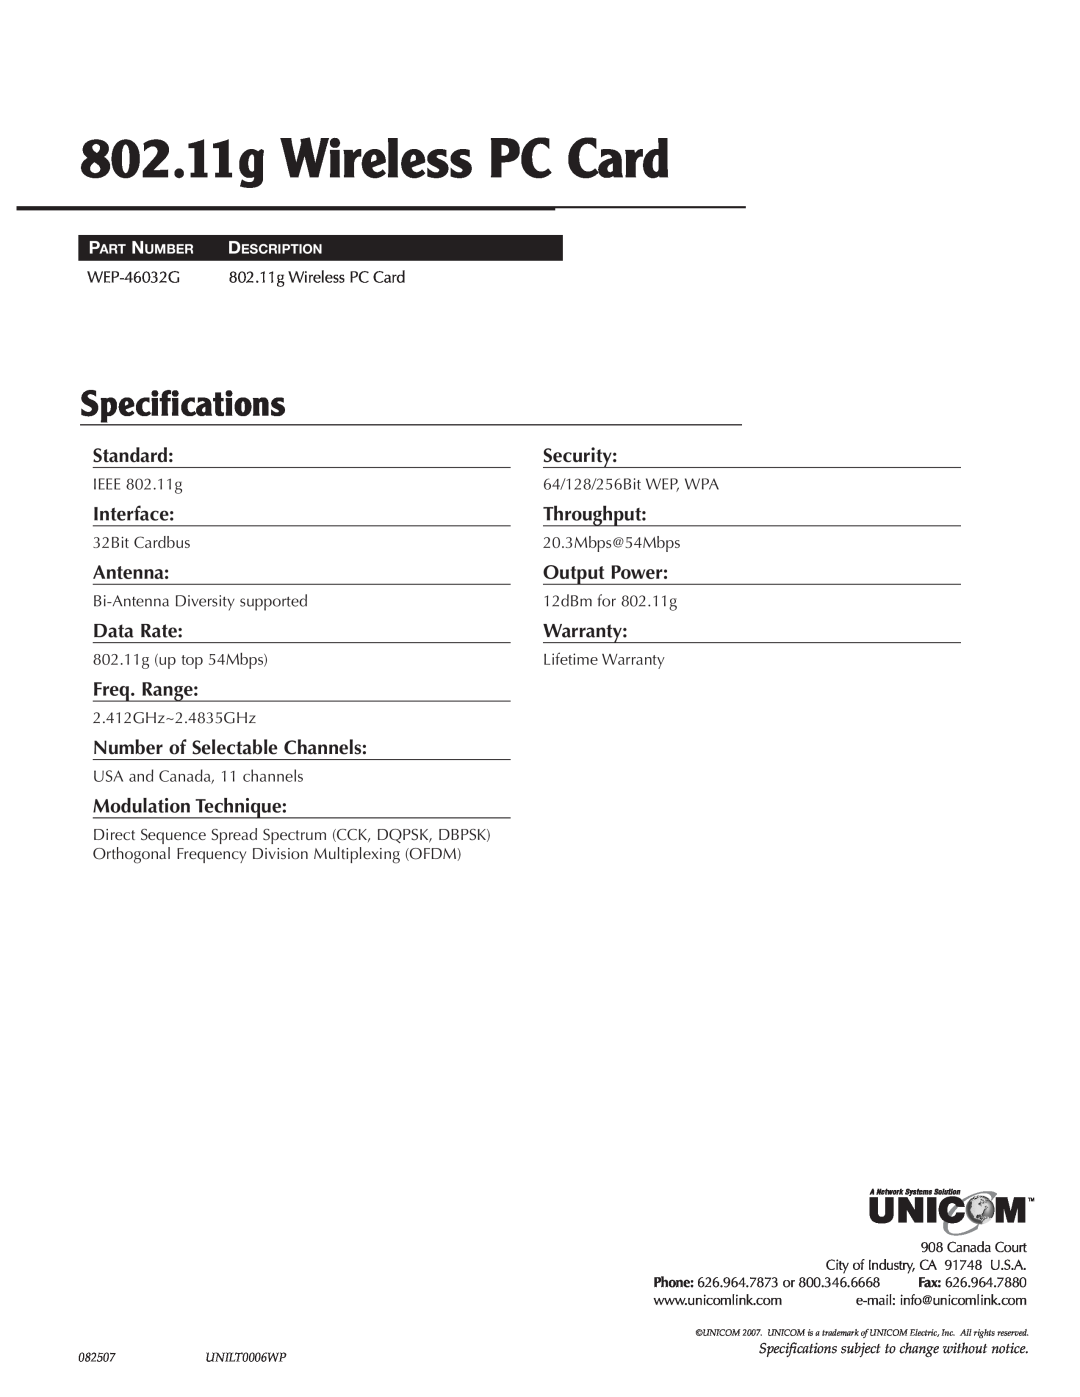 UNICOM Electric specifications 802.11g Wireless PC Card, Specification s 